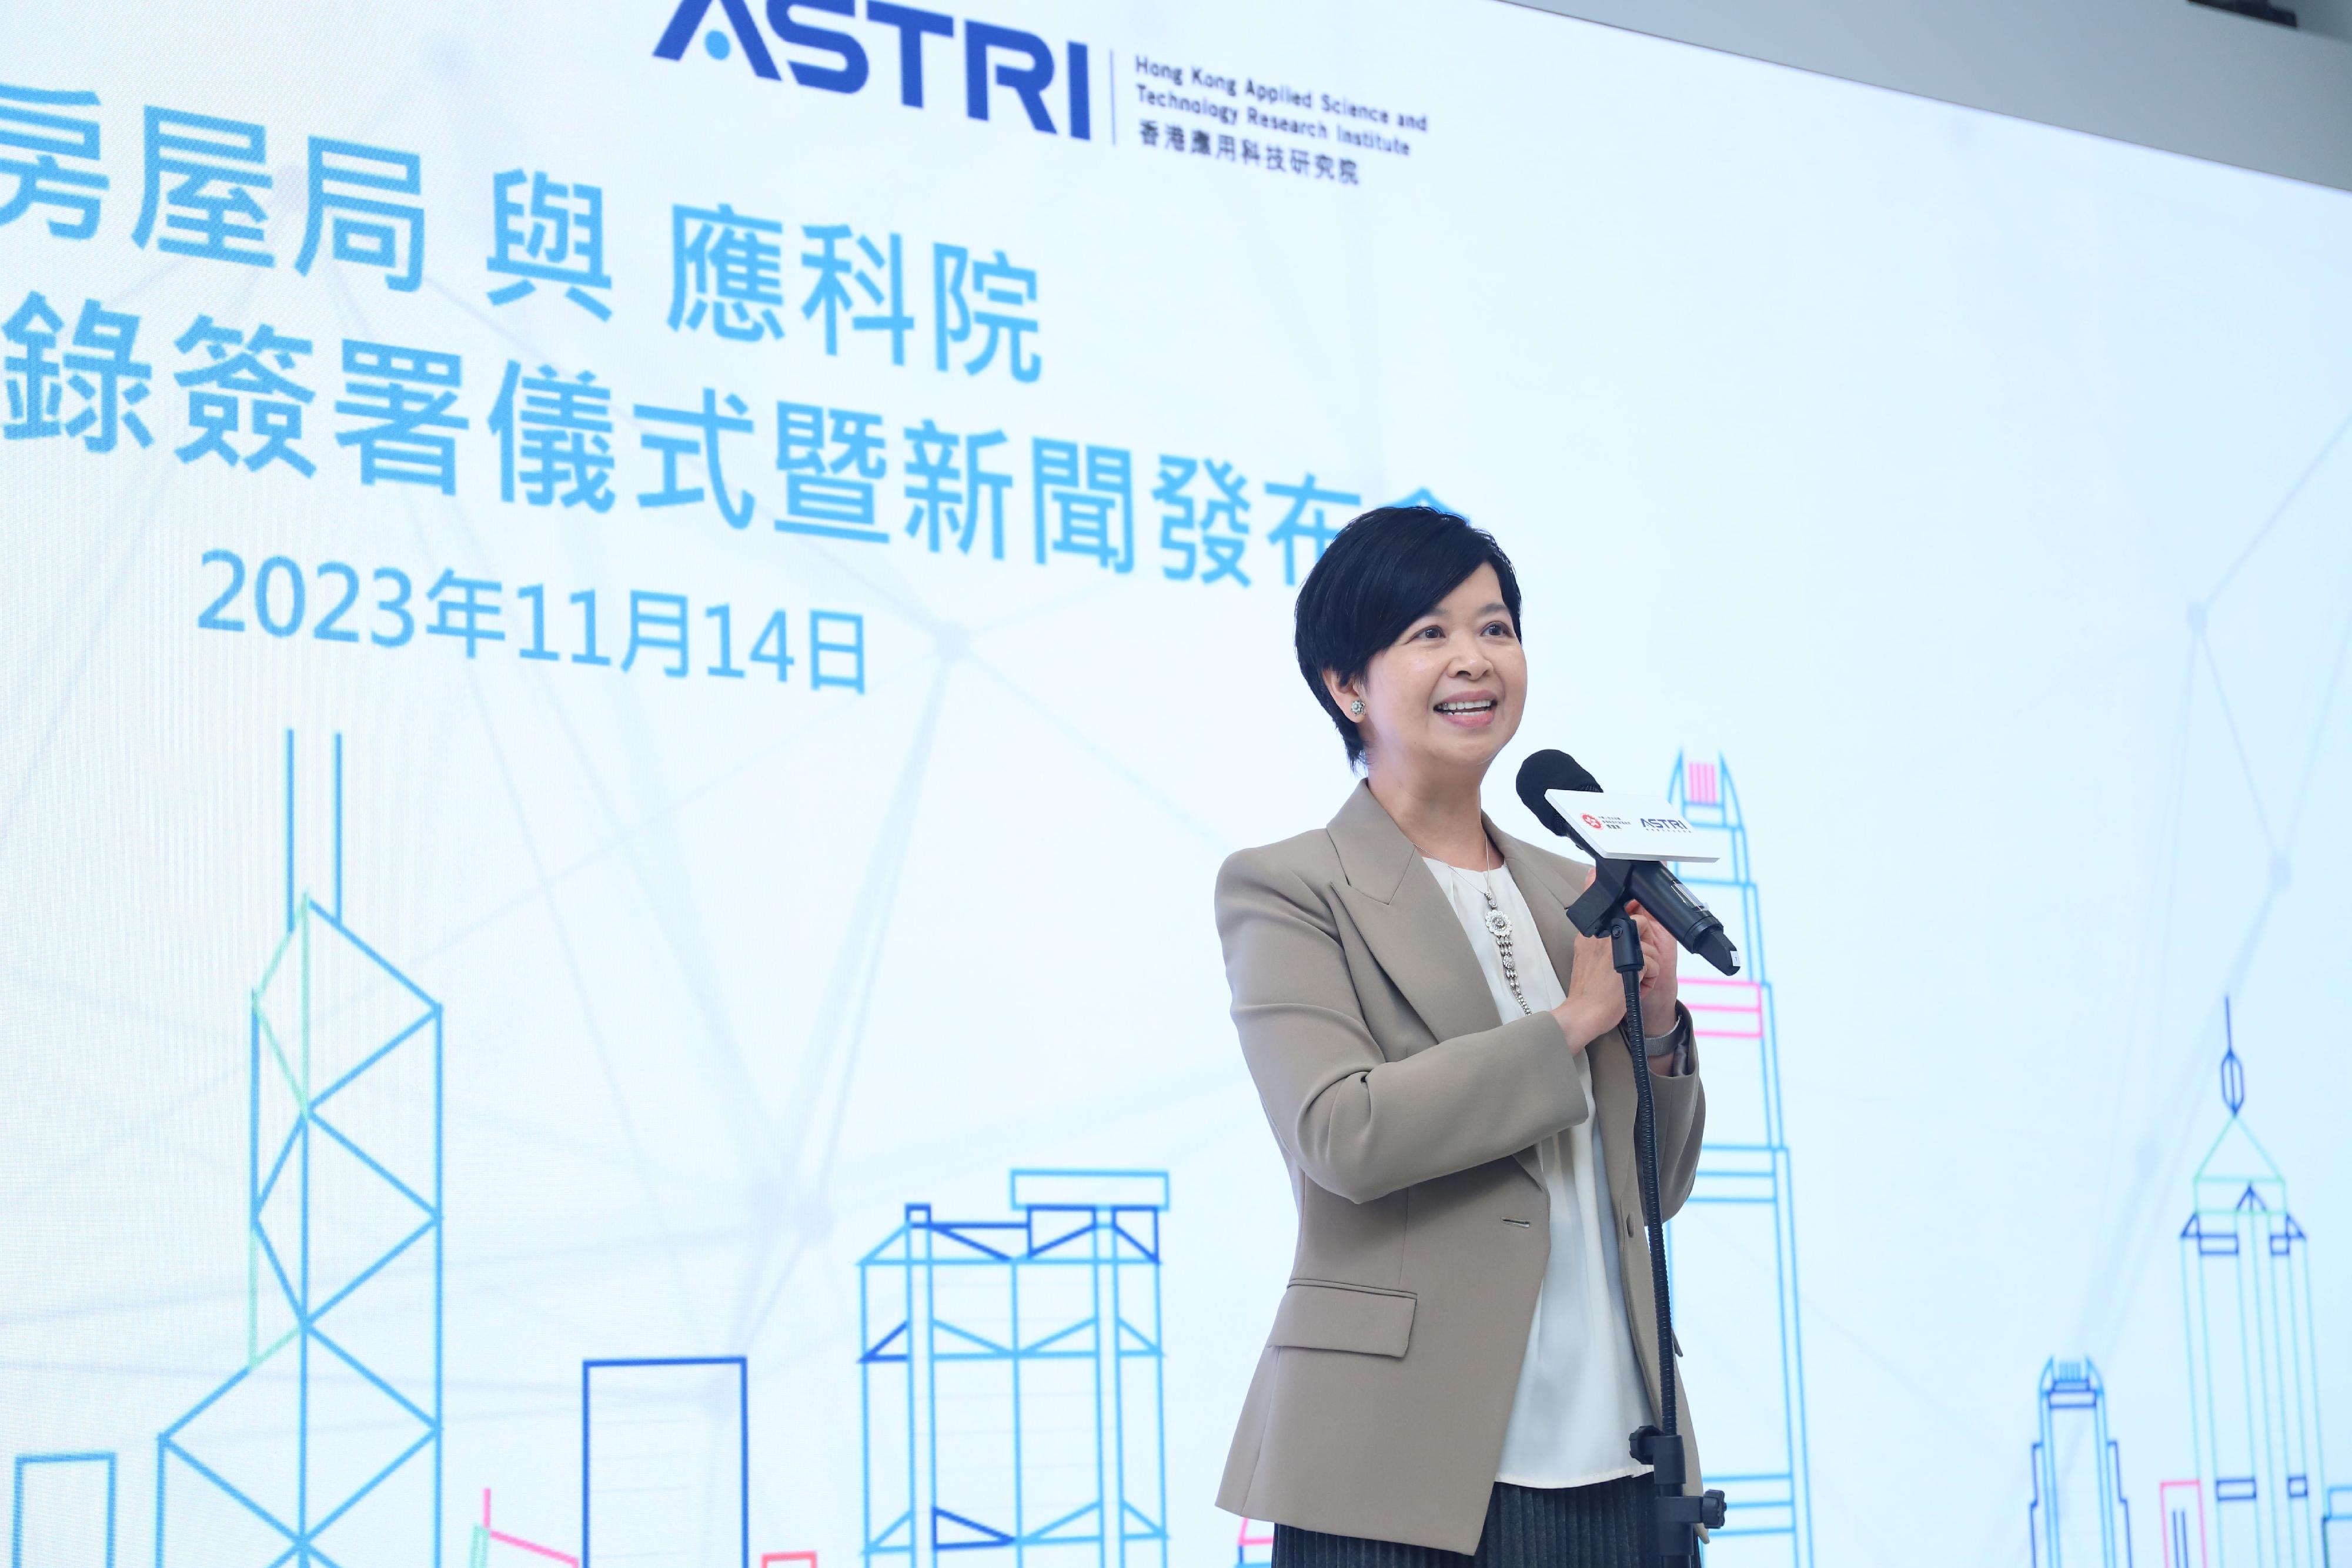 The Housing Bureau and the Hong Kong Applied Science and Technology Research Institute signed a Memorandum of Understanding today (November 14) to jointly explore innovative solutions and applications for enhancing construction efficiency and safety, as well as optimising property management processes. Photo shows the Secretary for Housing, Ms Winnie Ho, delivering a speech at the signing ceremony.